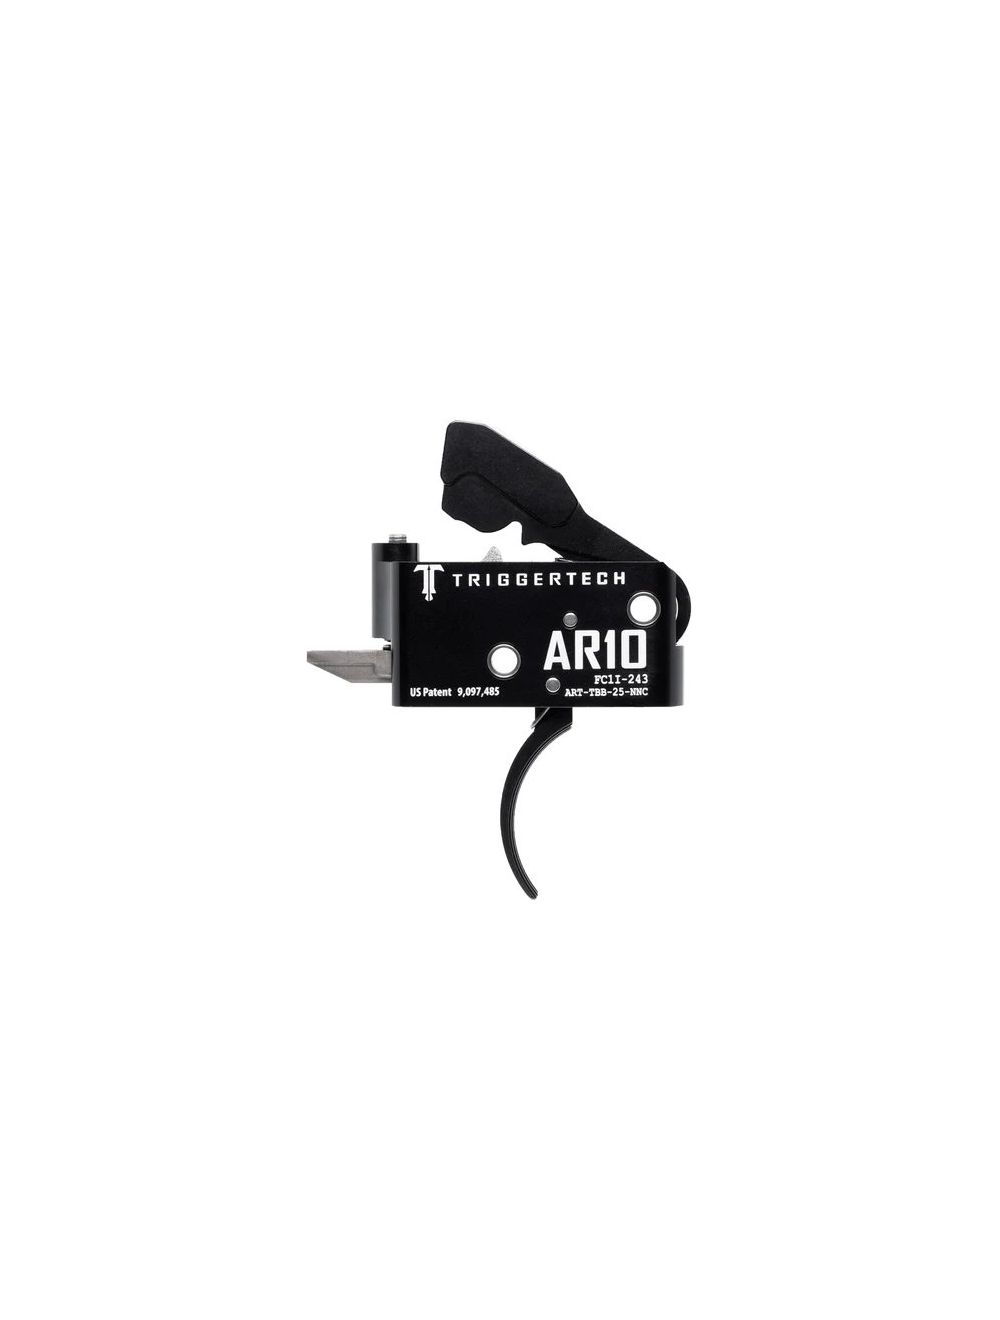 AR10 Two-Stage Adaptable Trigger